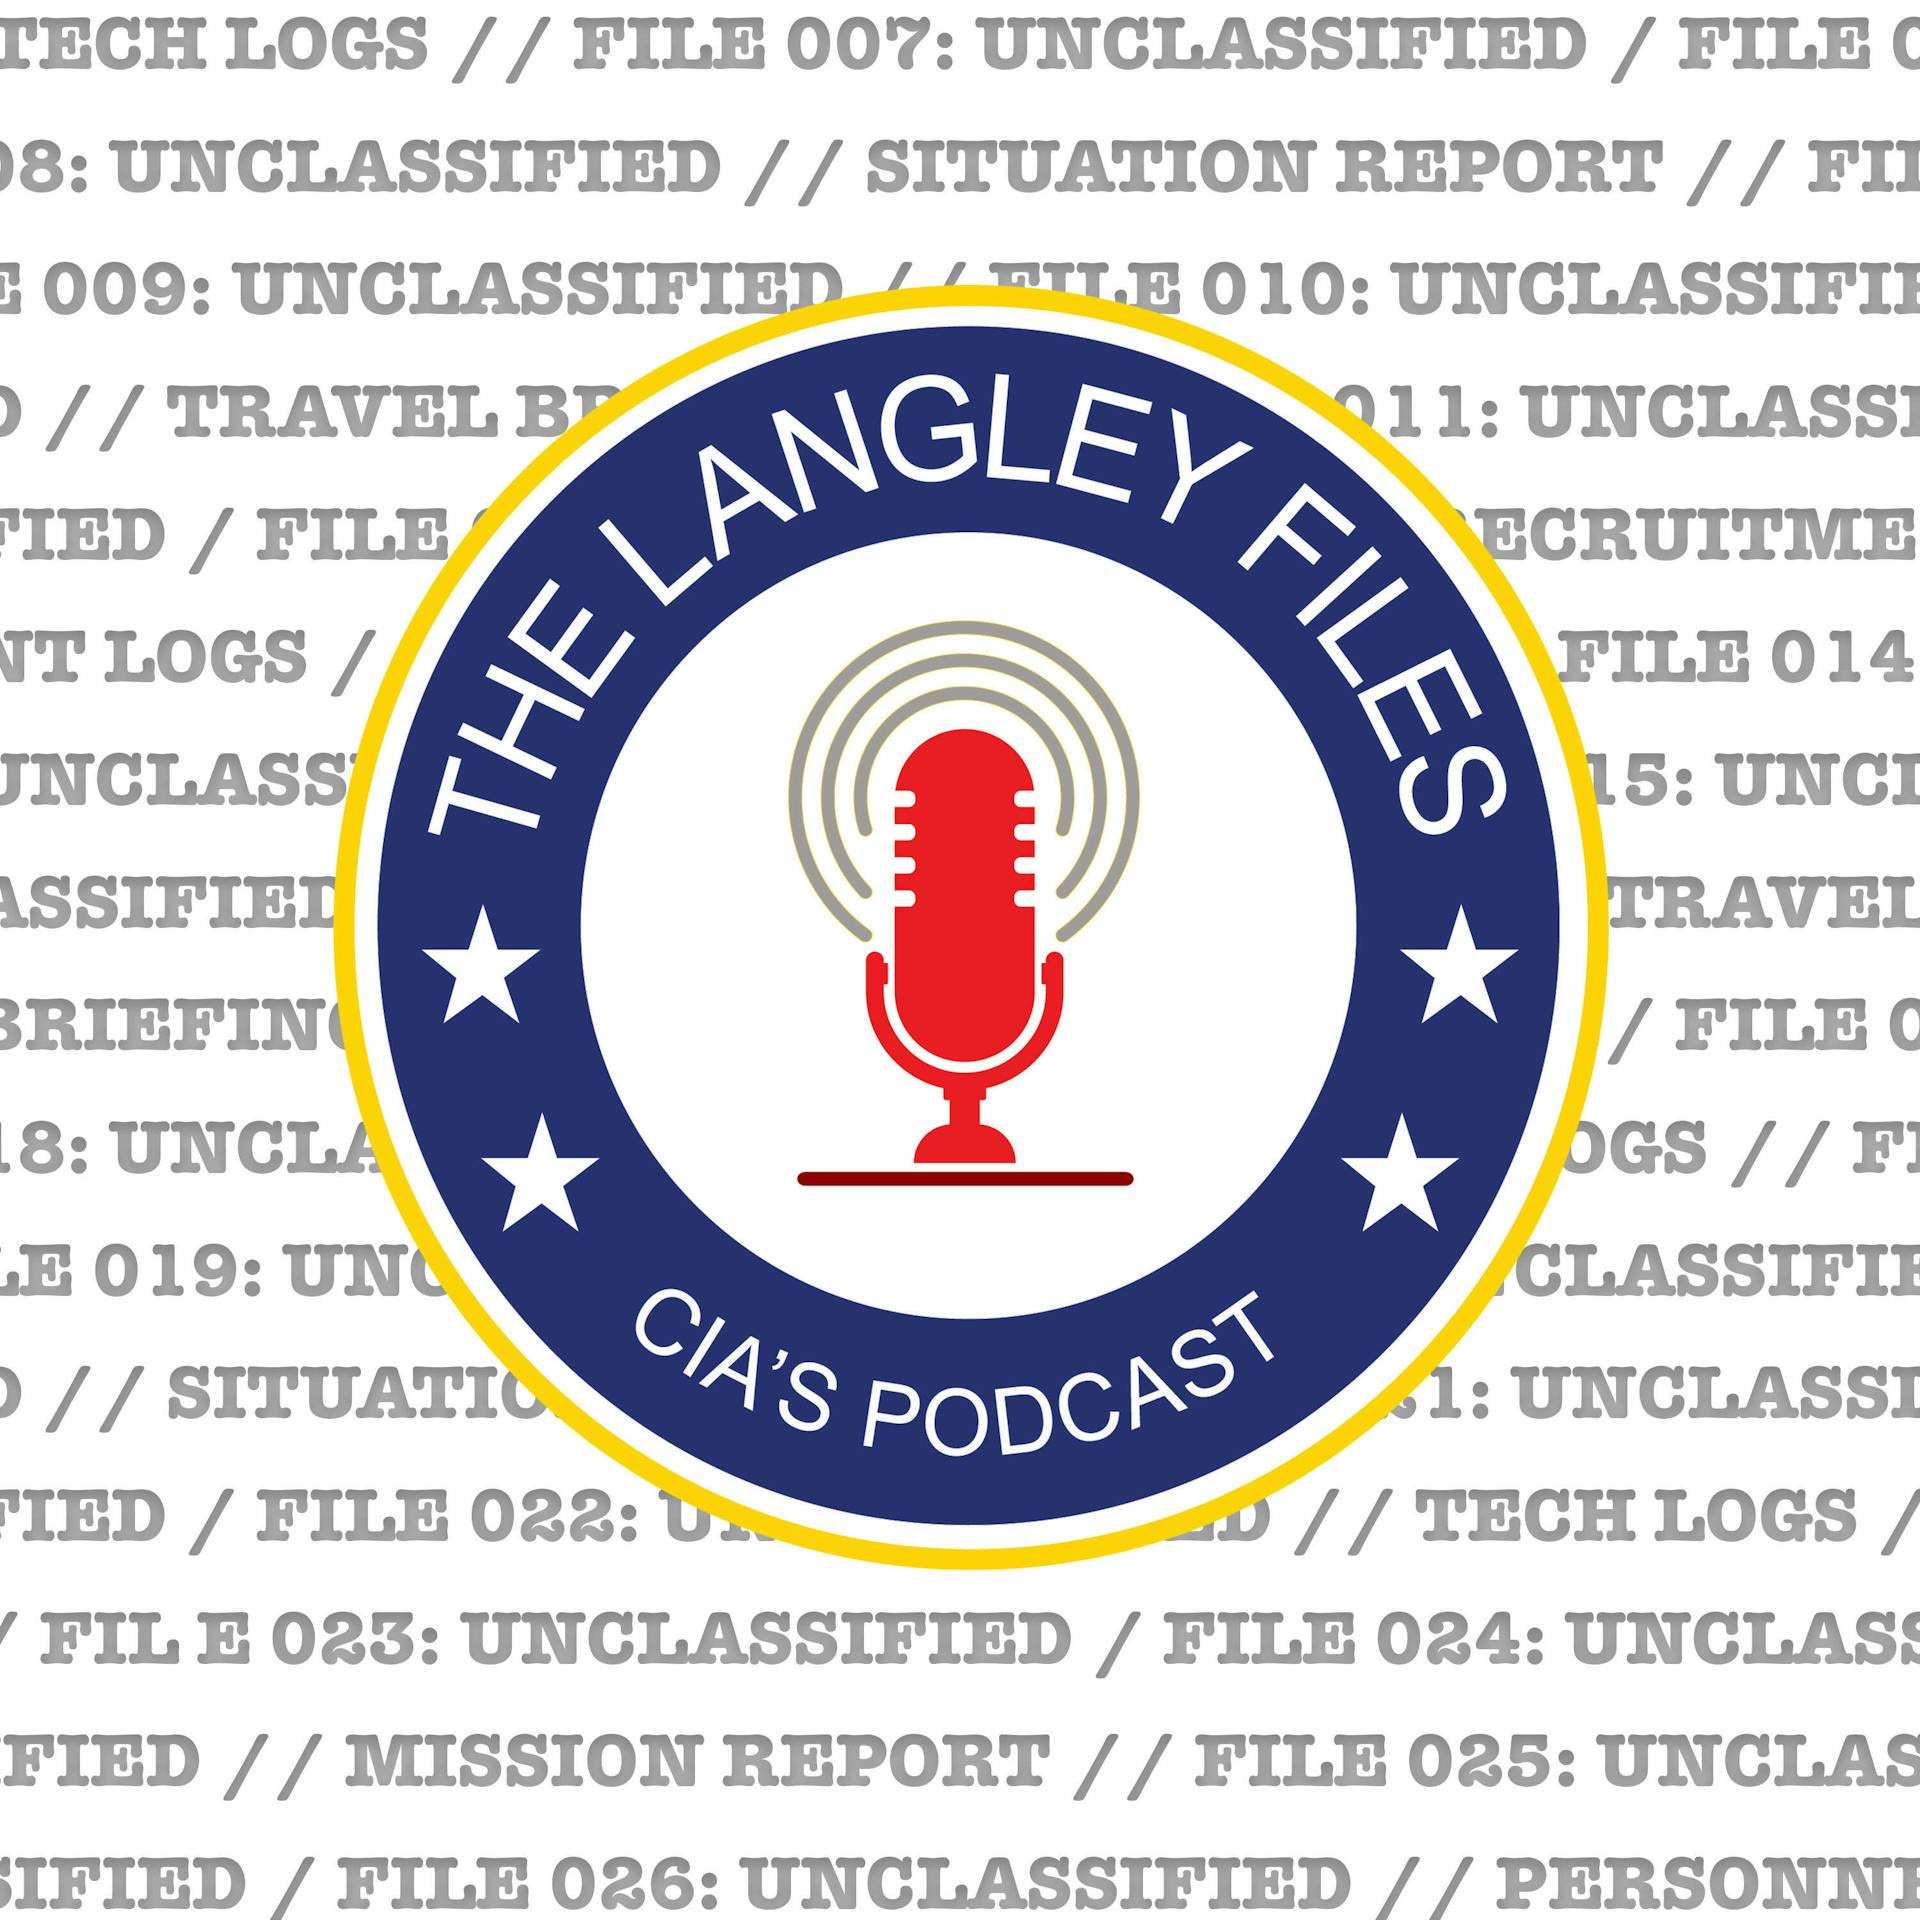 Review: The Langley Files: CIA&#039;s Podcast